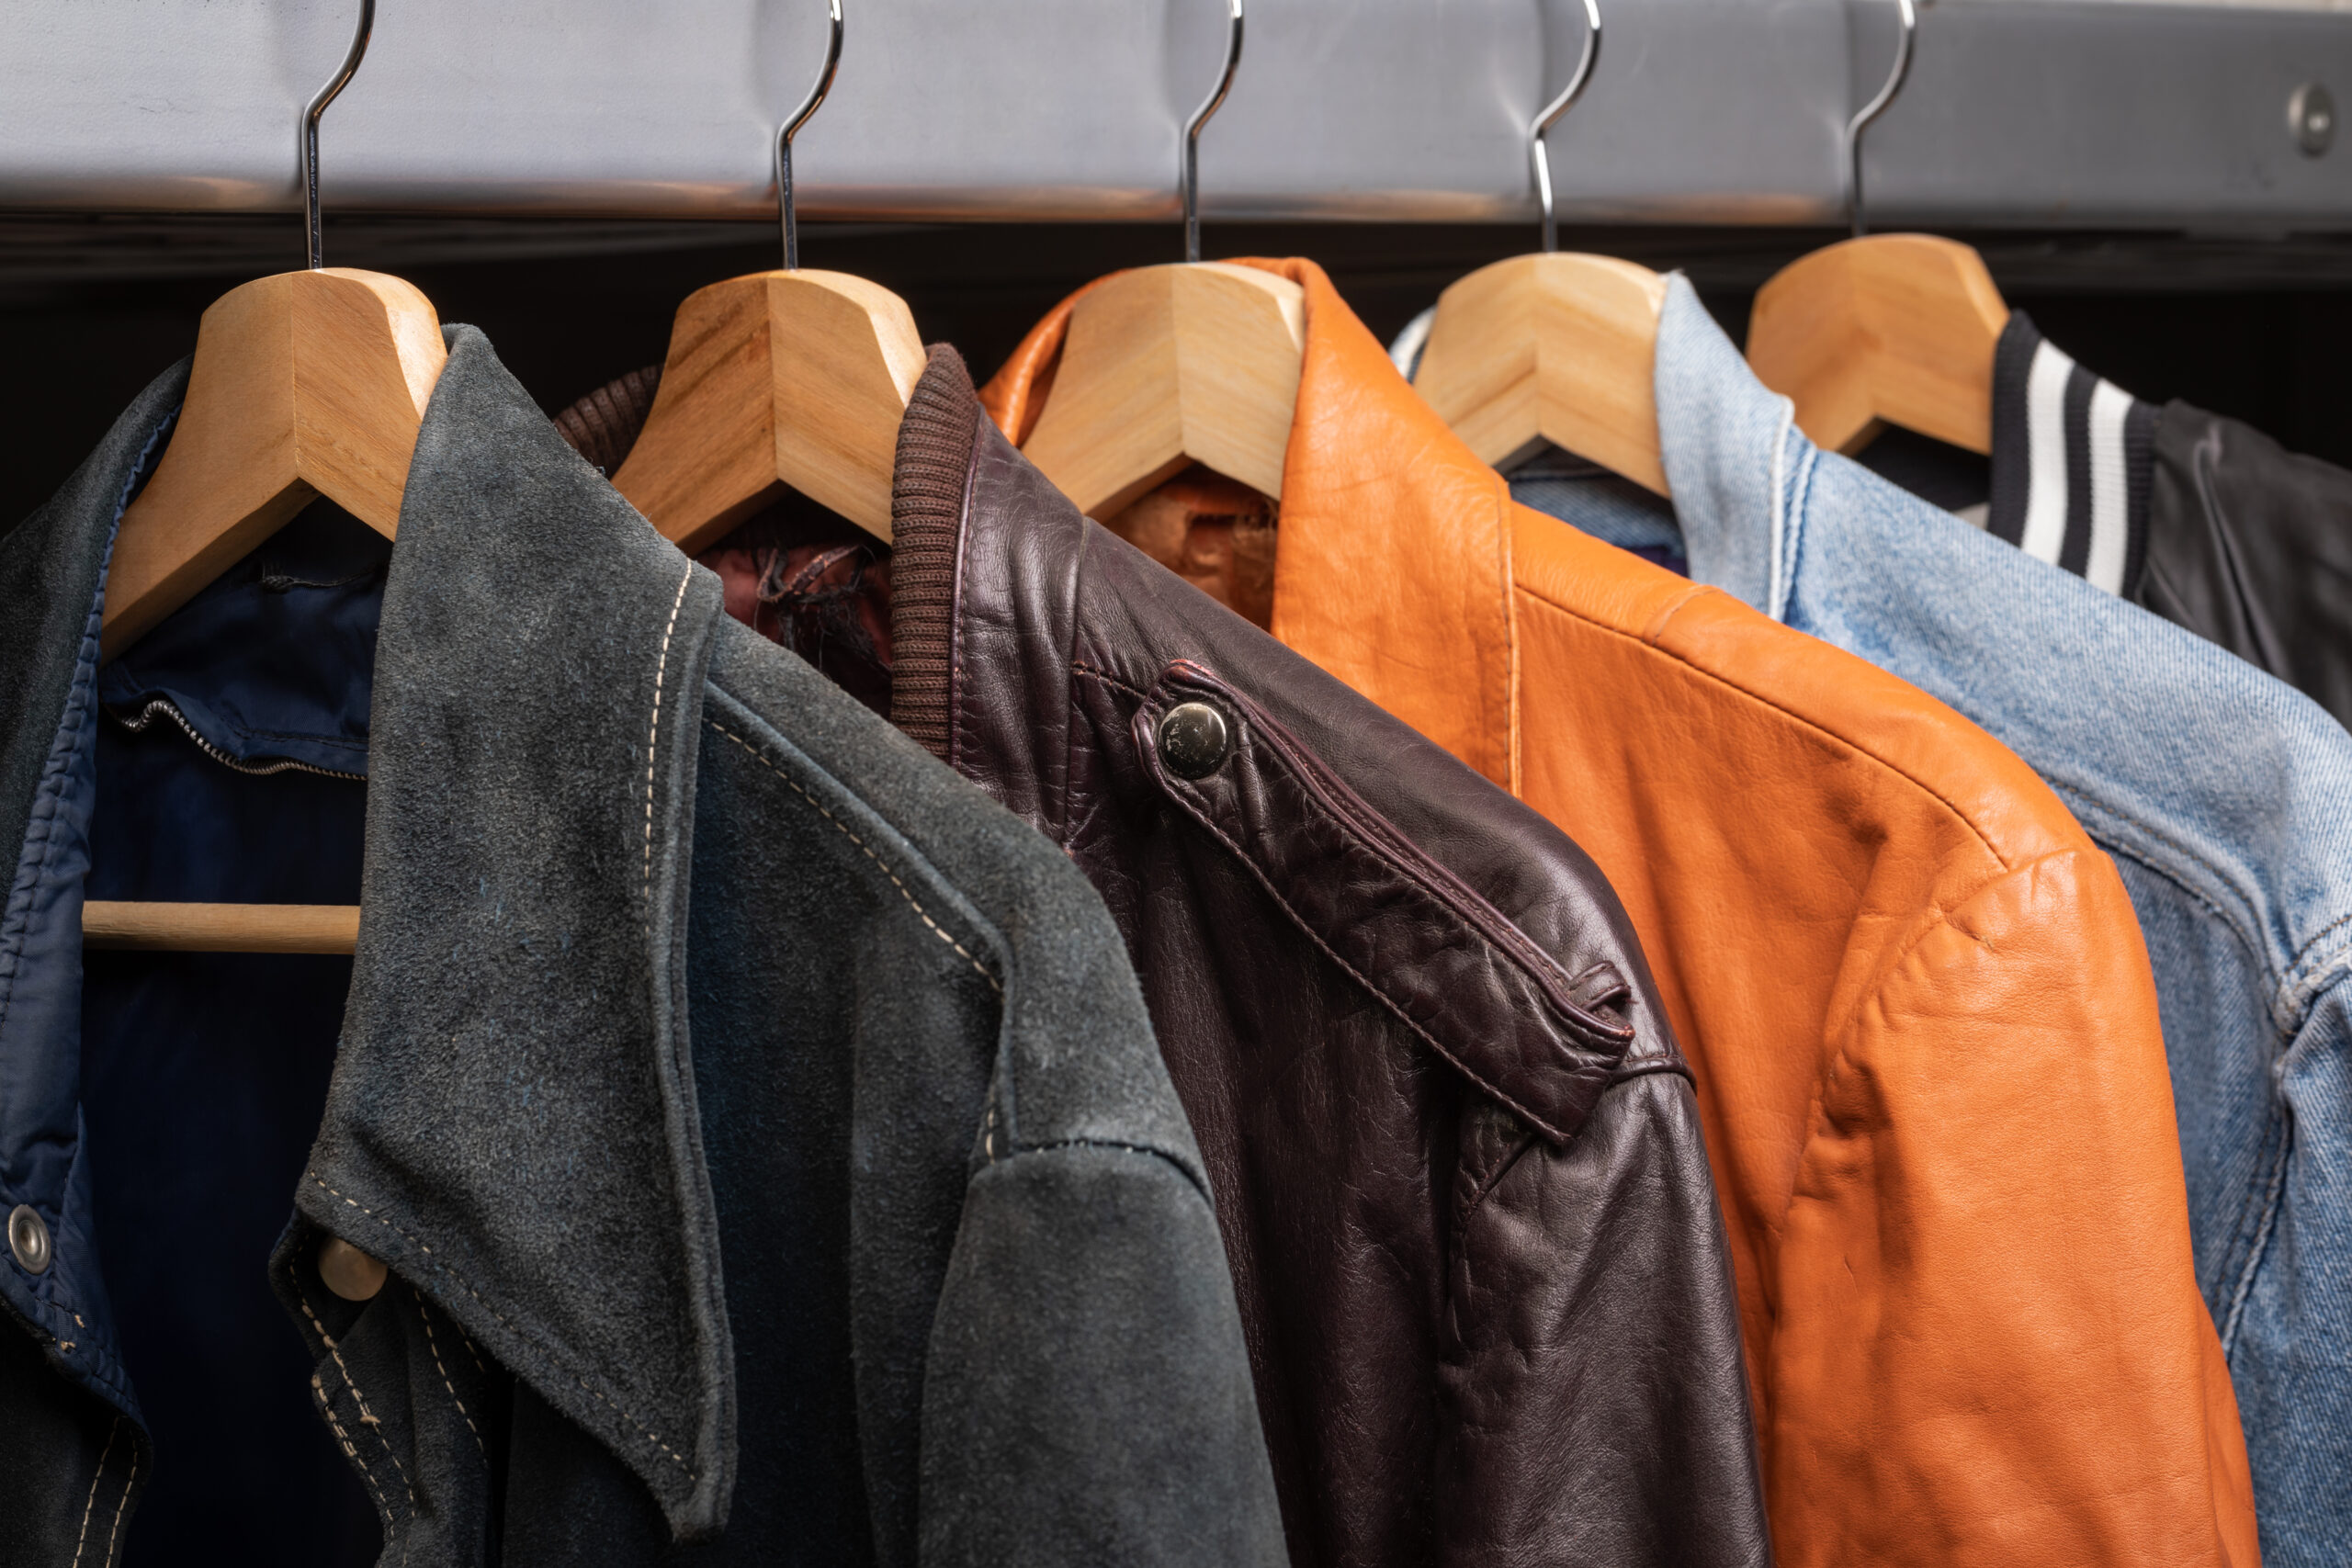 Webinar: How connected garments can help enable a circular economy – August 11 at 11:00 AM ET